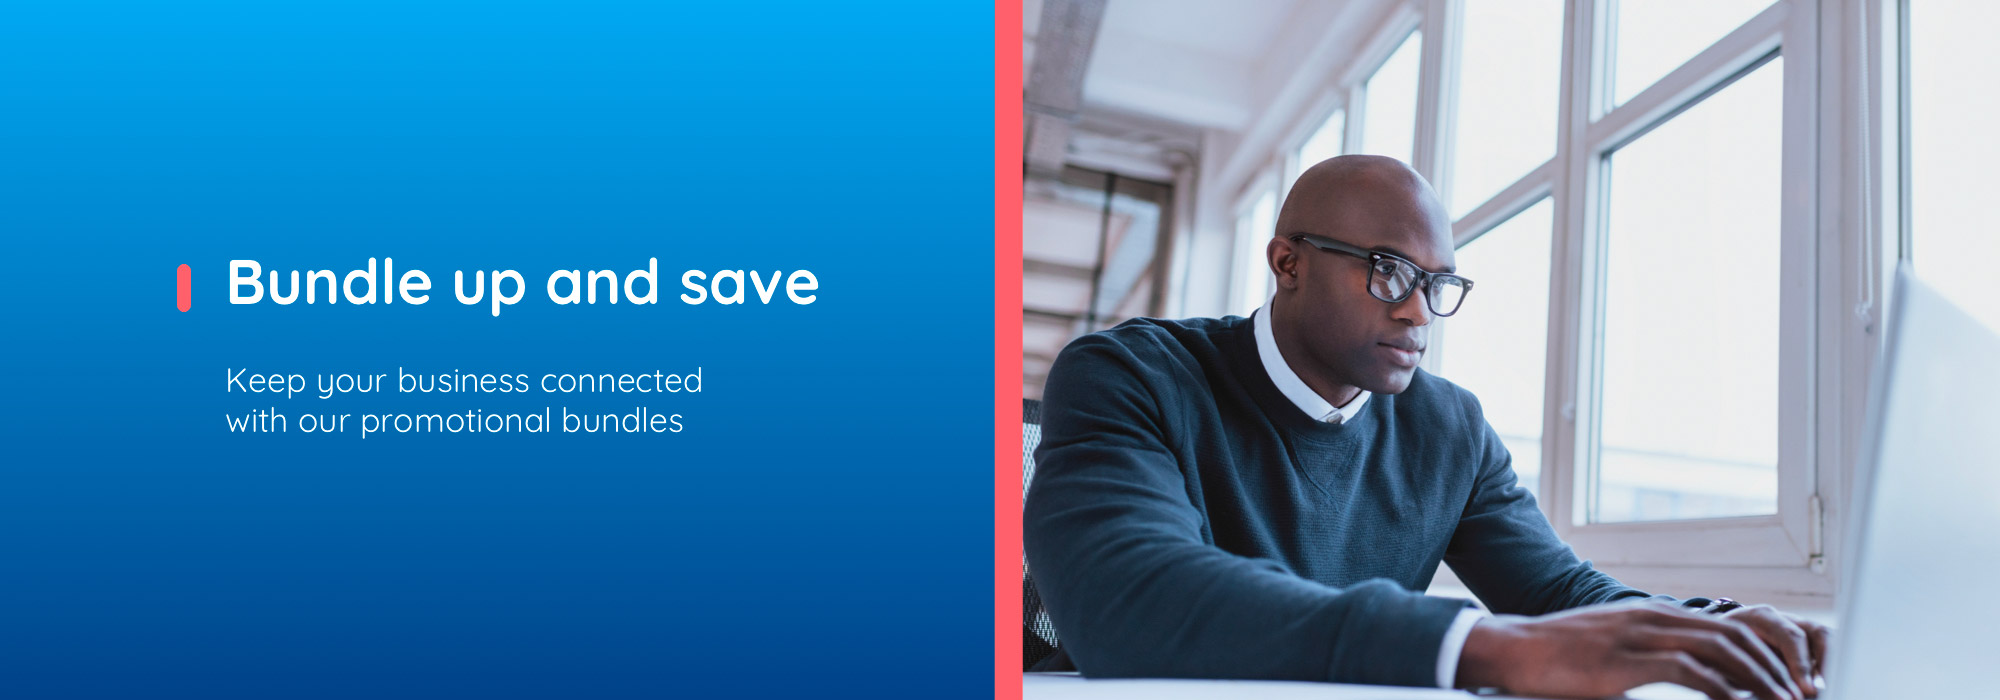 Bundle up and save. Keep your business connected with our promotional bundles.